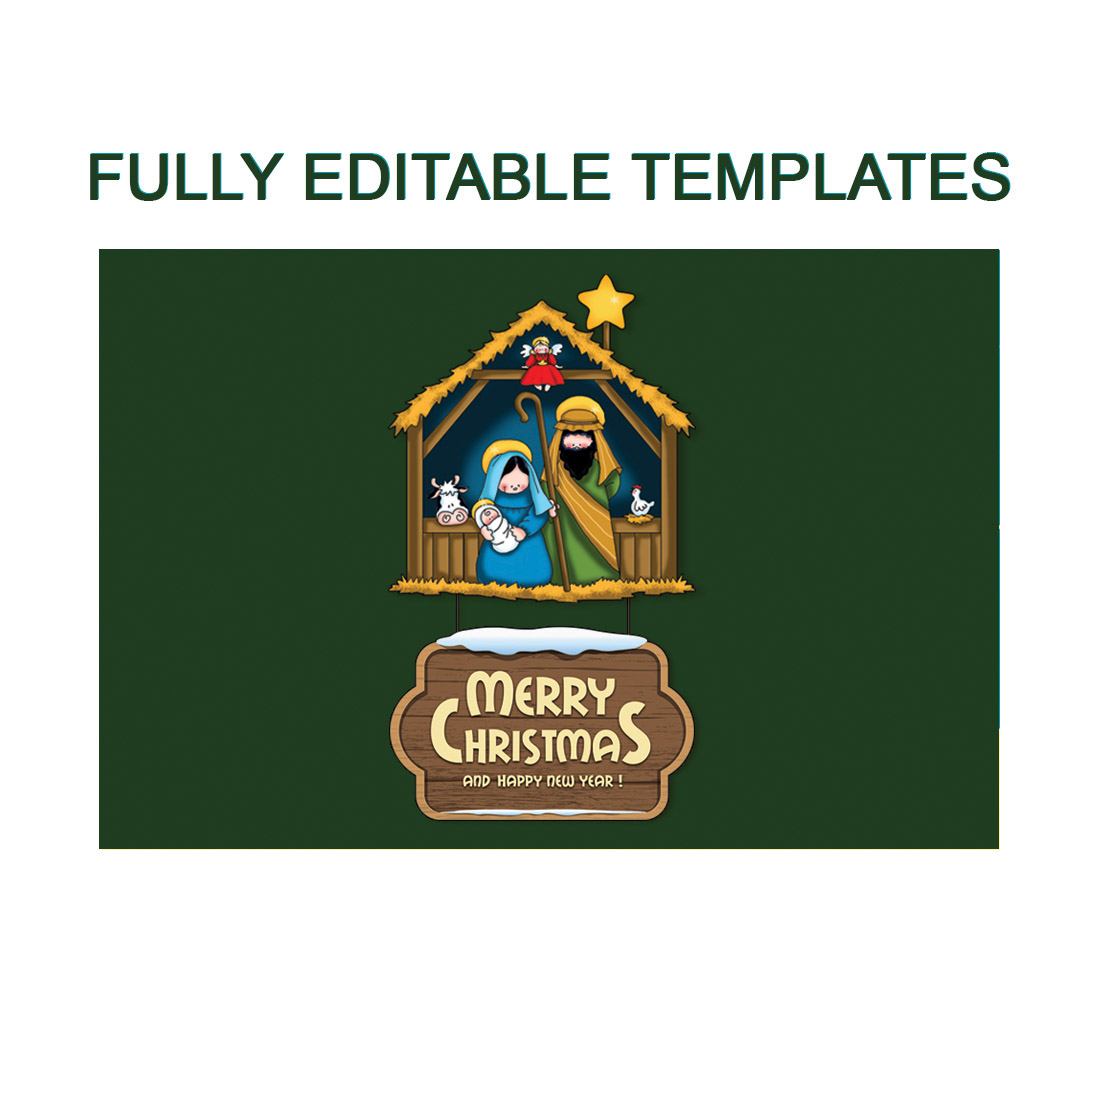 Fully Editable Christmas Greetings Card Templates preview image.